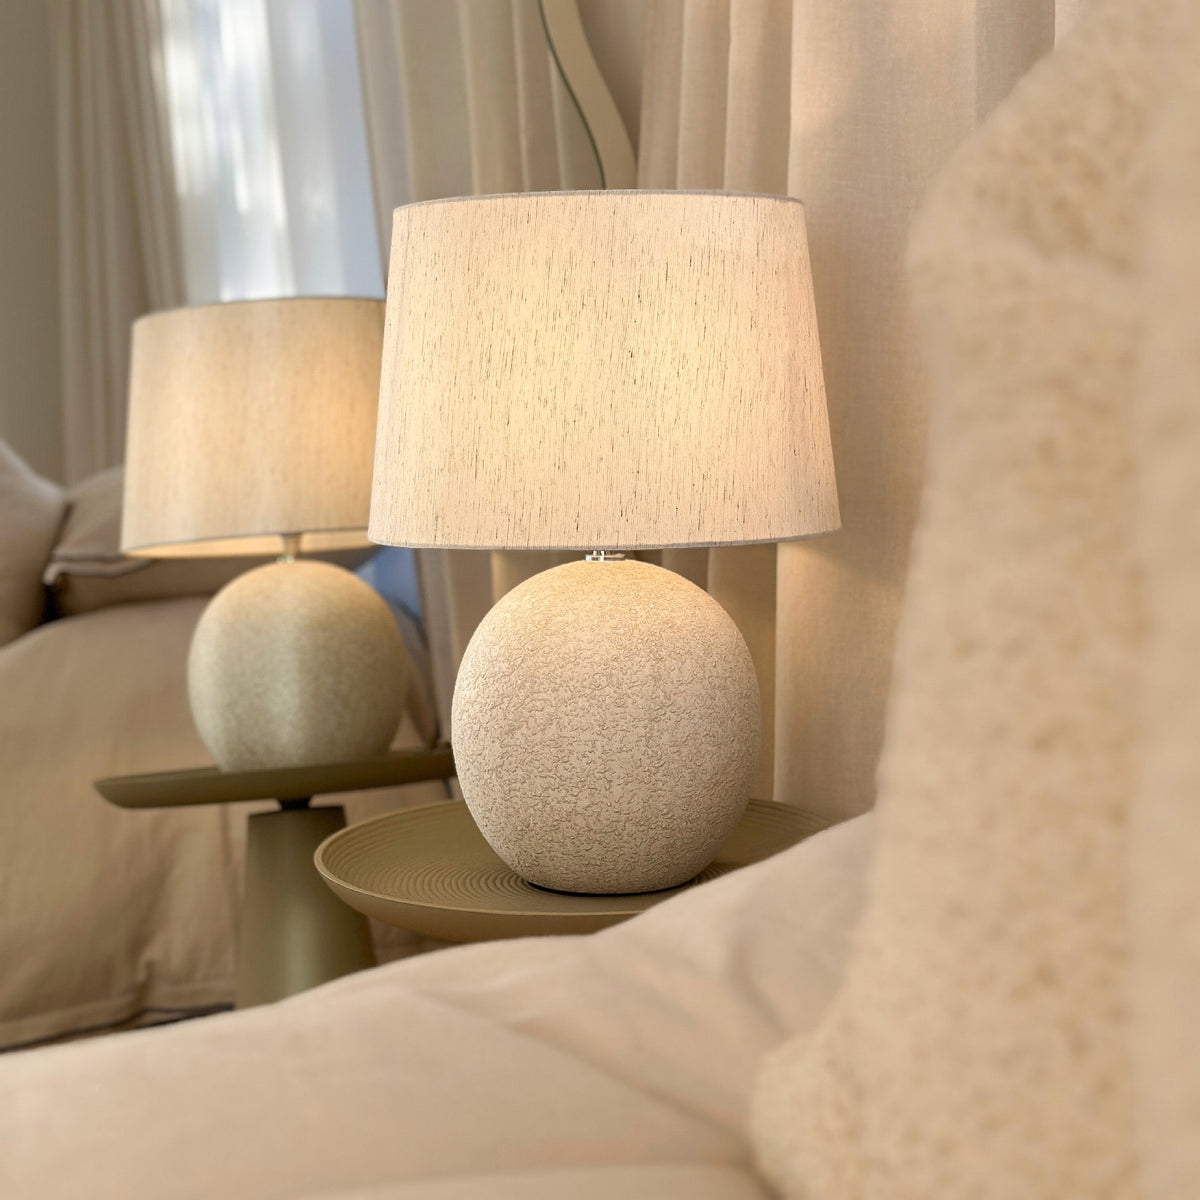 Stone ceramic drum shade table lamp on bedside table